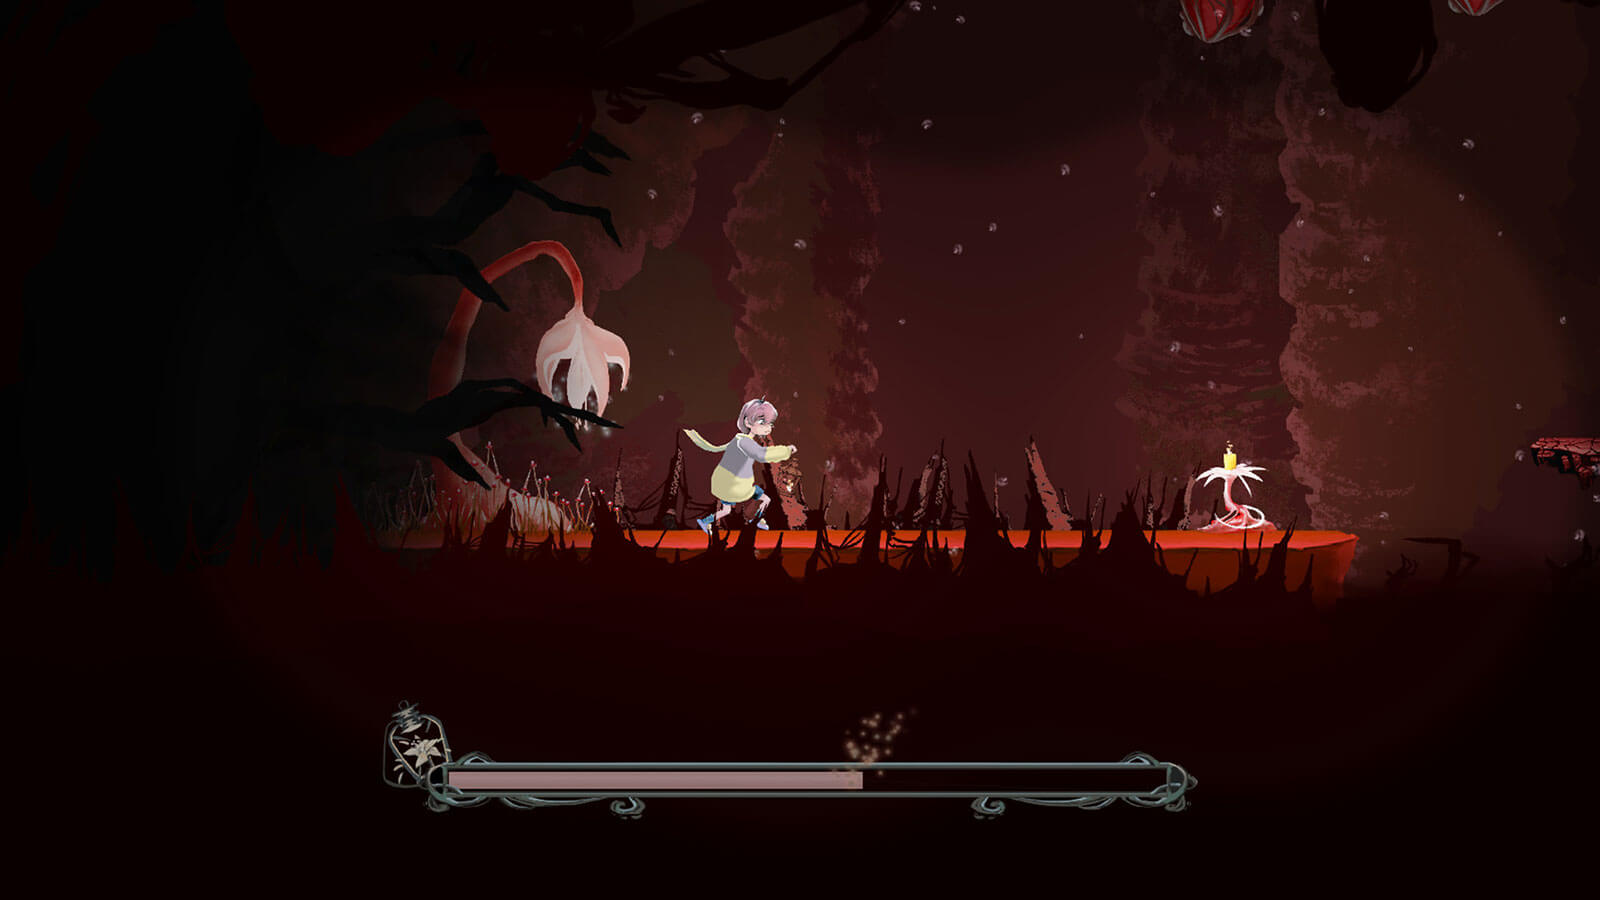 Protagonist runs along a red platform lit by a small plant holding a candle